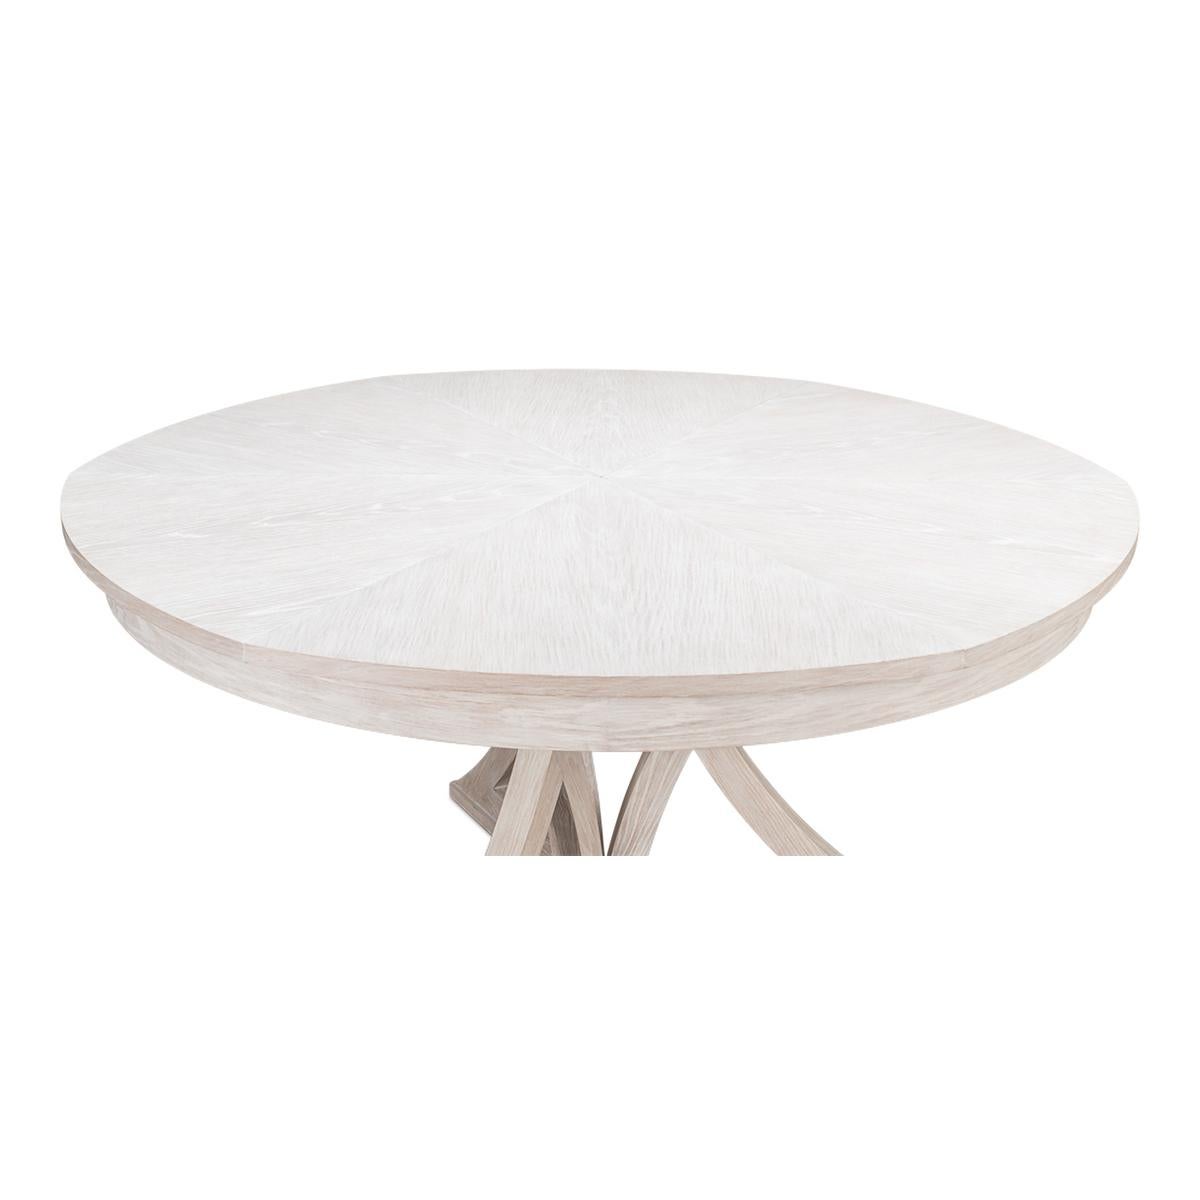 Oak Rustic Round Dining Table, Whitewash White For Sale